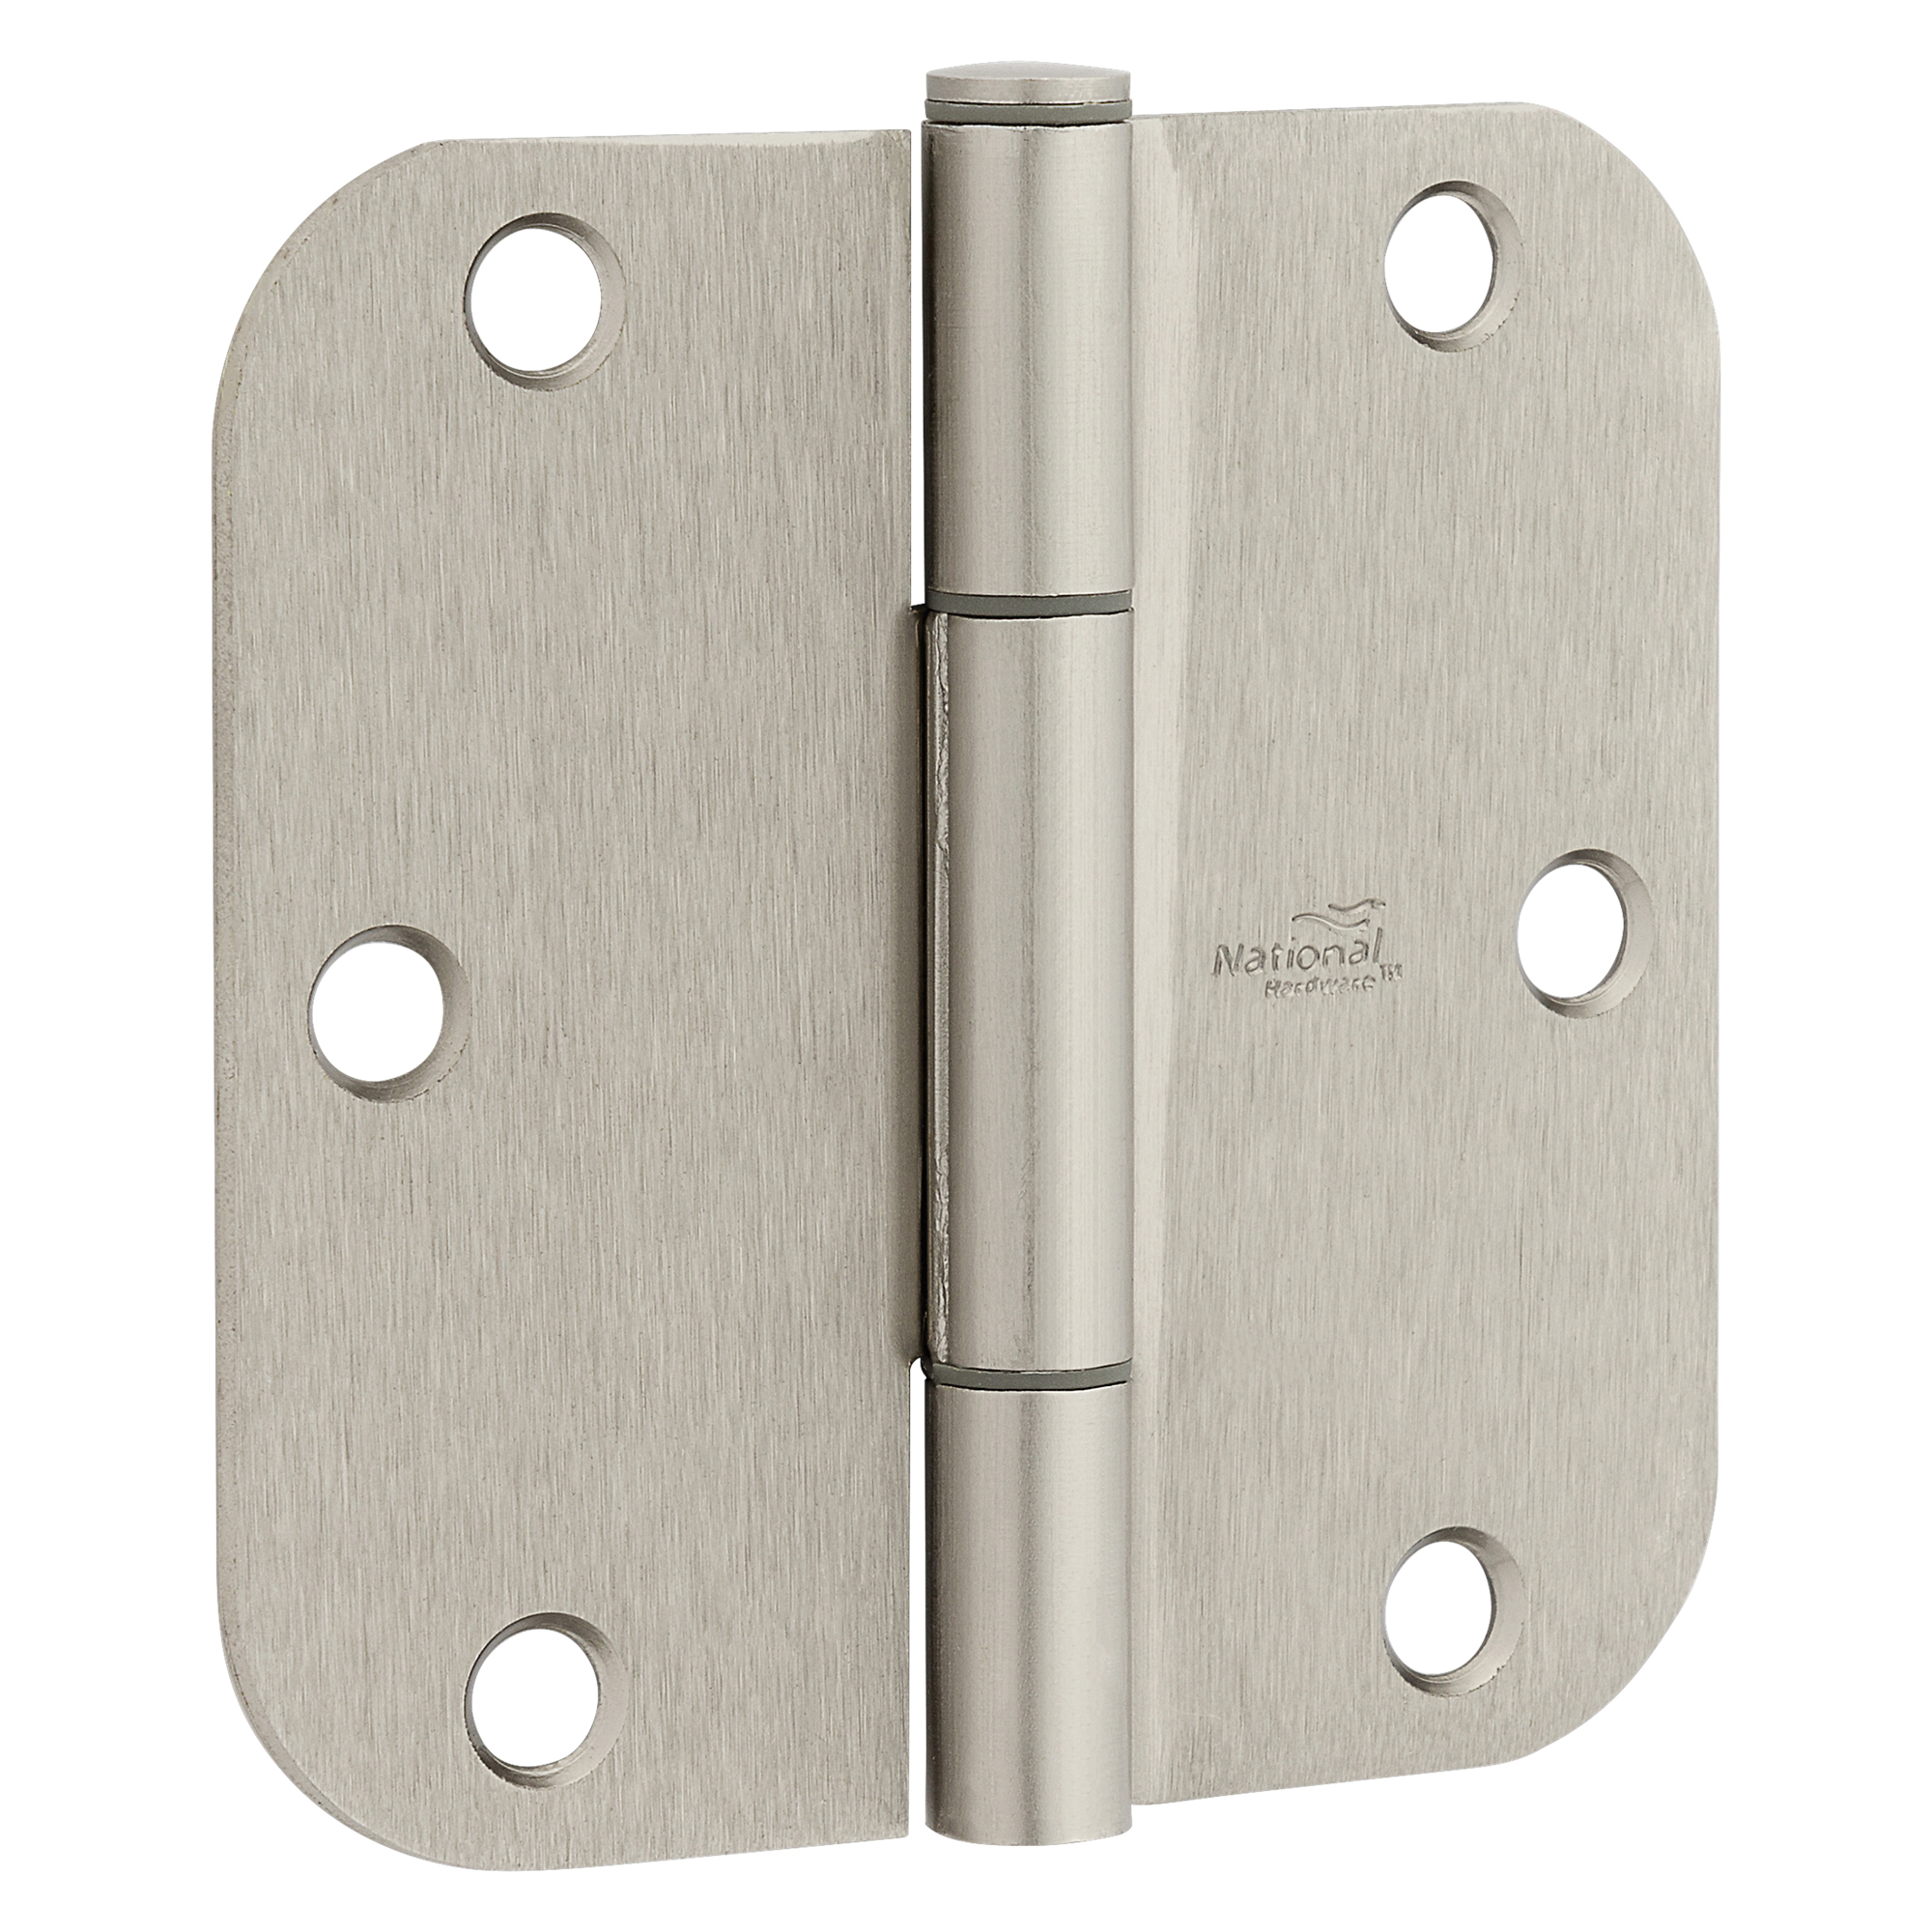 National Hardware Magnetic Hook, Nickel at Tractor Supply Co.